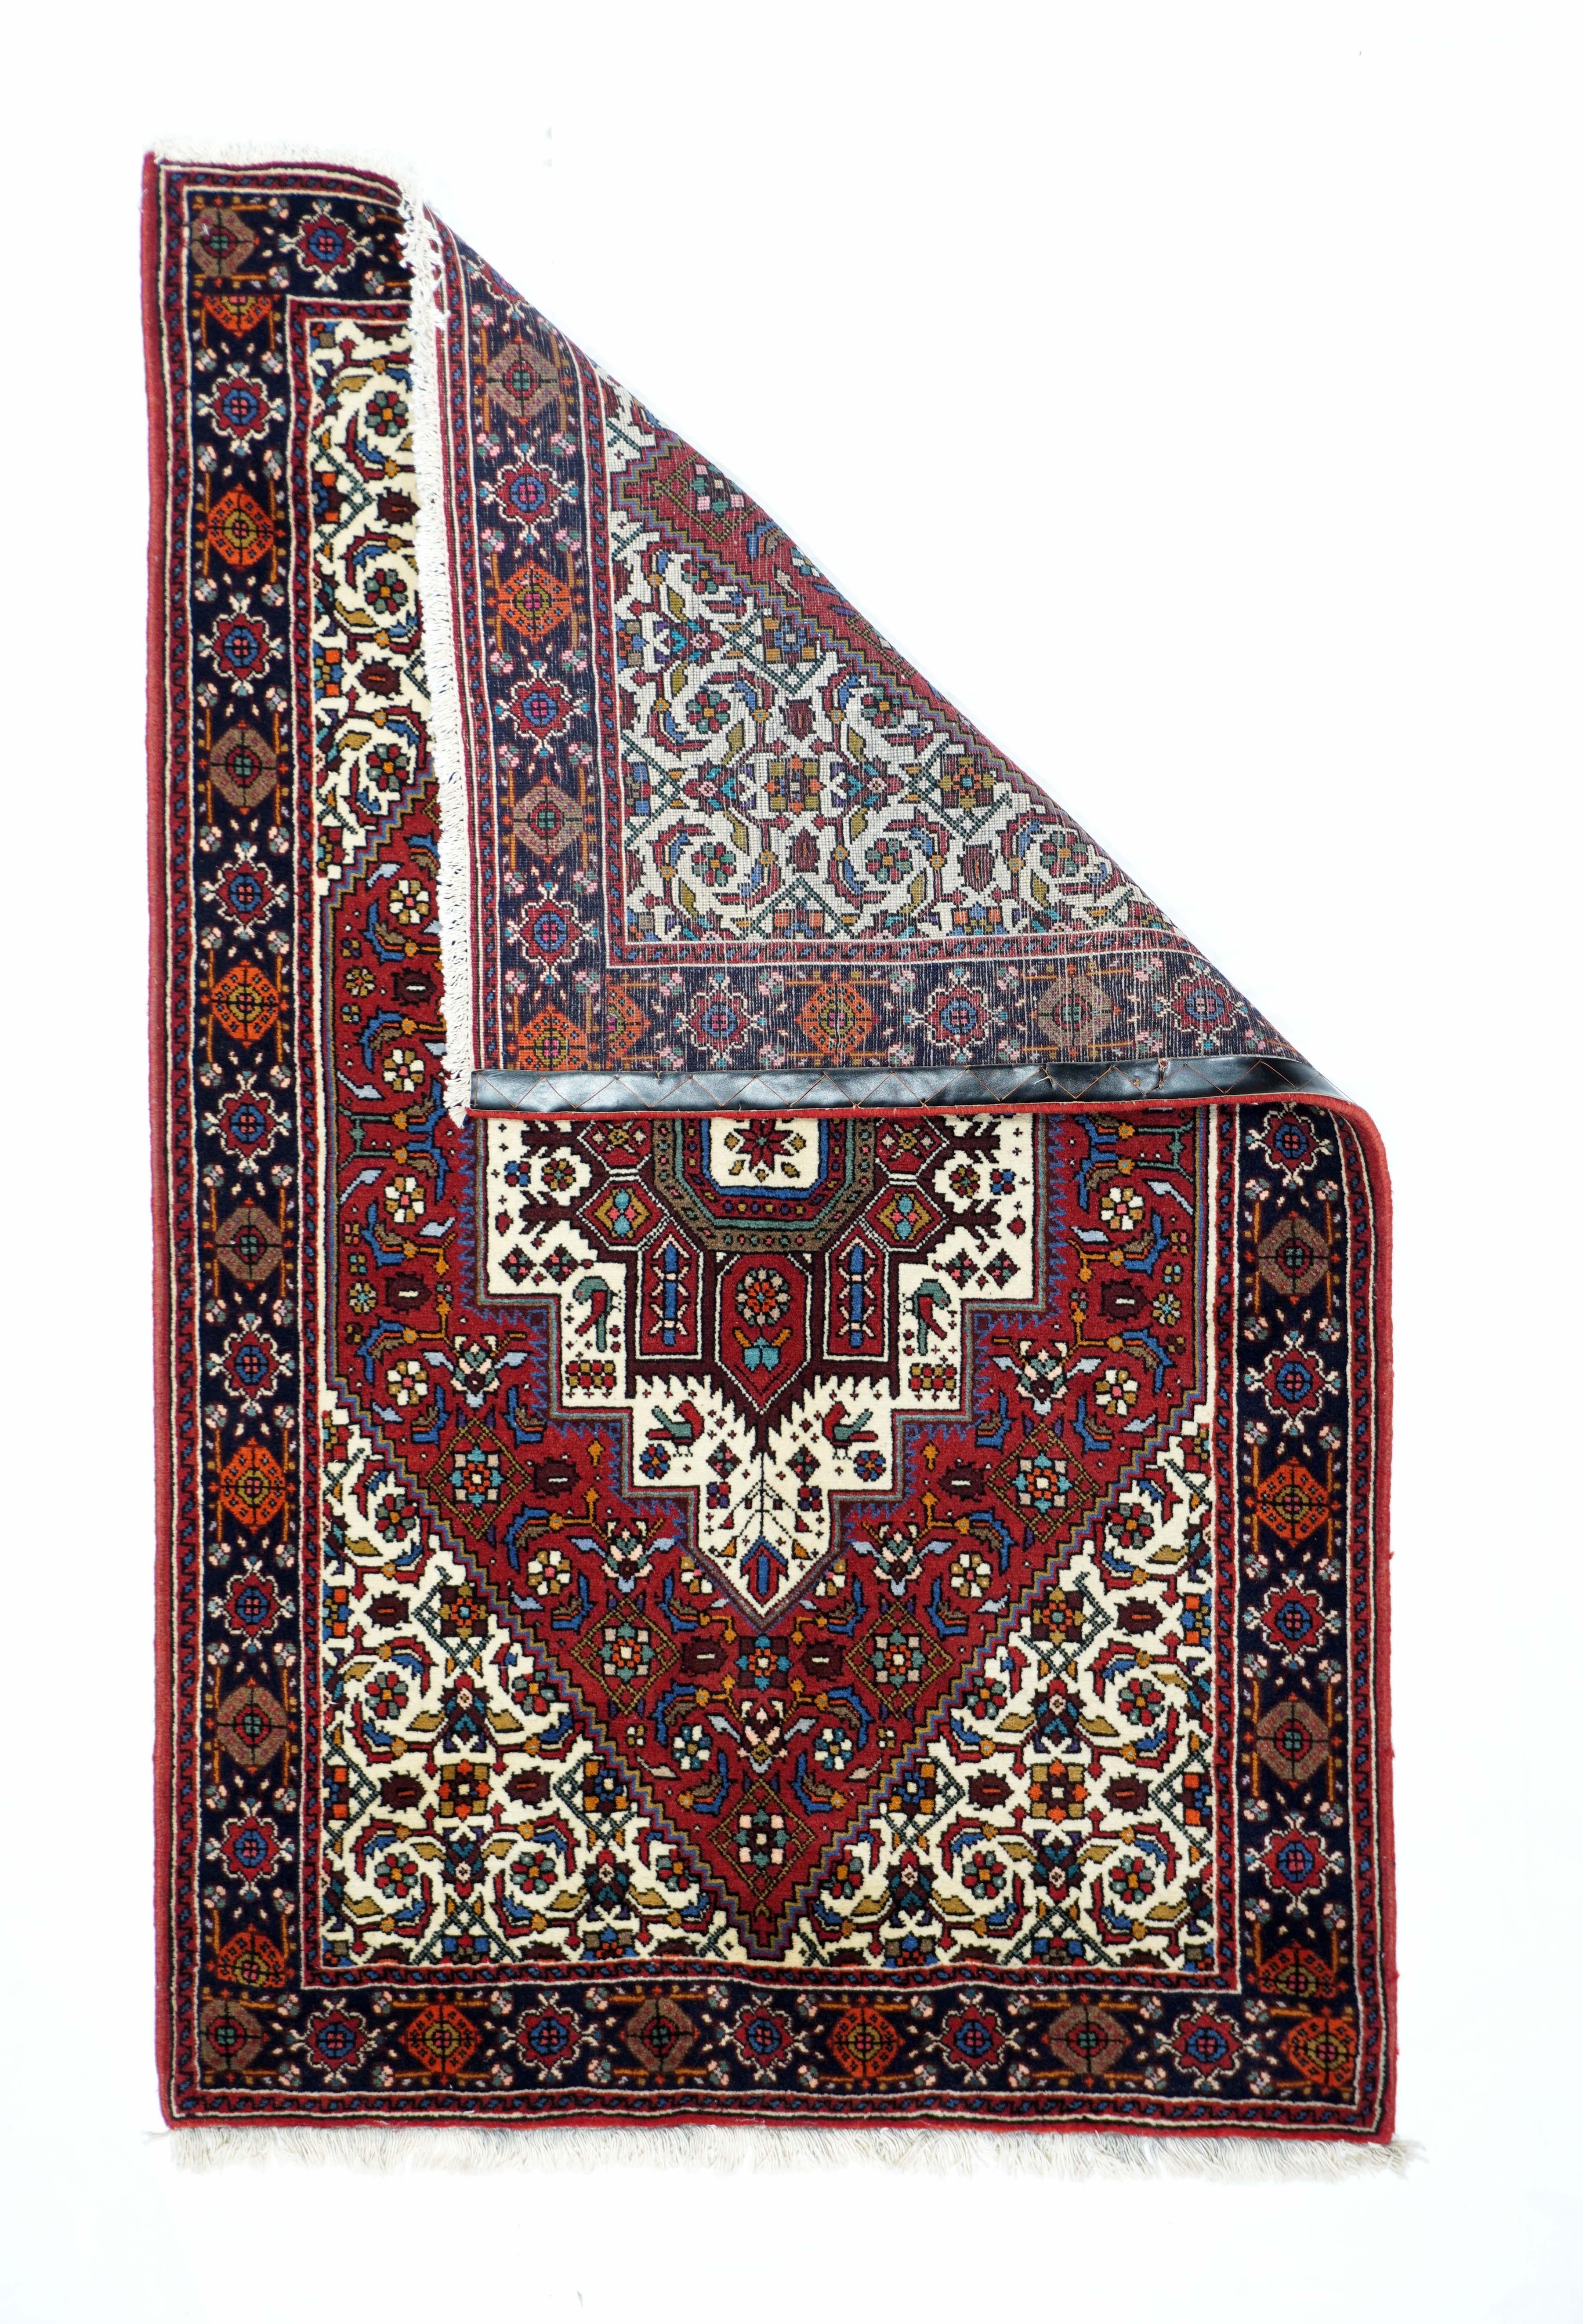 Bidjar Rug 3.3'' x 5.1''. A larger version of our 1145-1146 scatters. The iconic navy border of cartouches and sectioned octagons, frames the ivory Herati-patterned field with its stepped and pointed coral Herati upright hexagon subfield. The